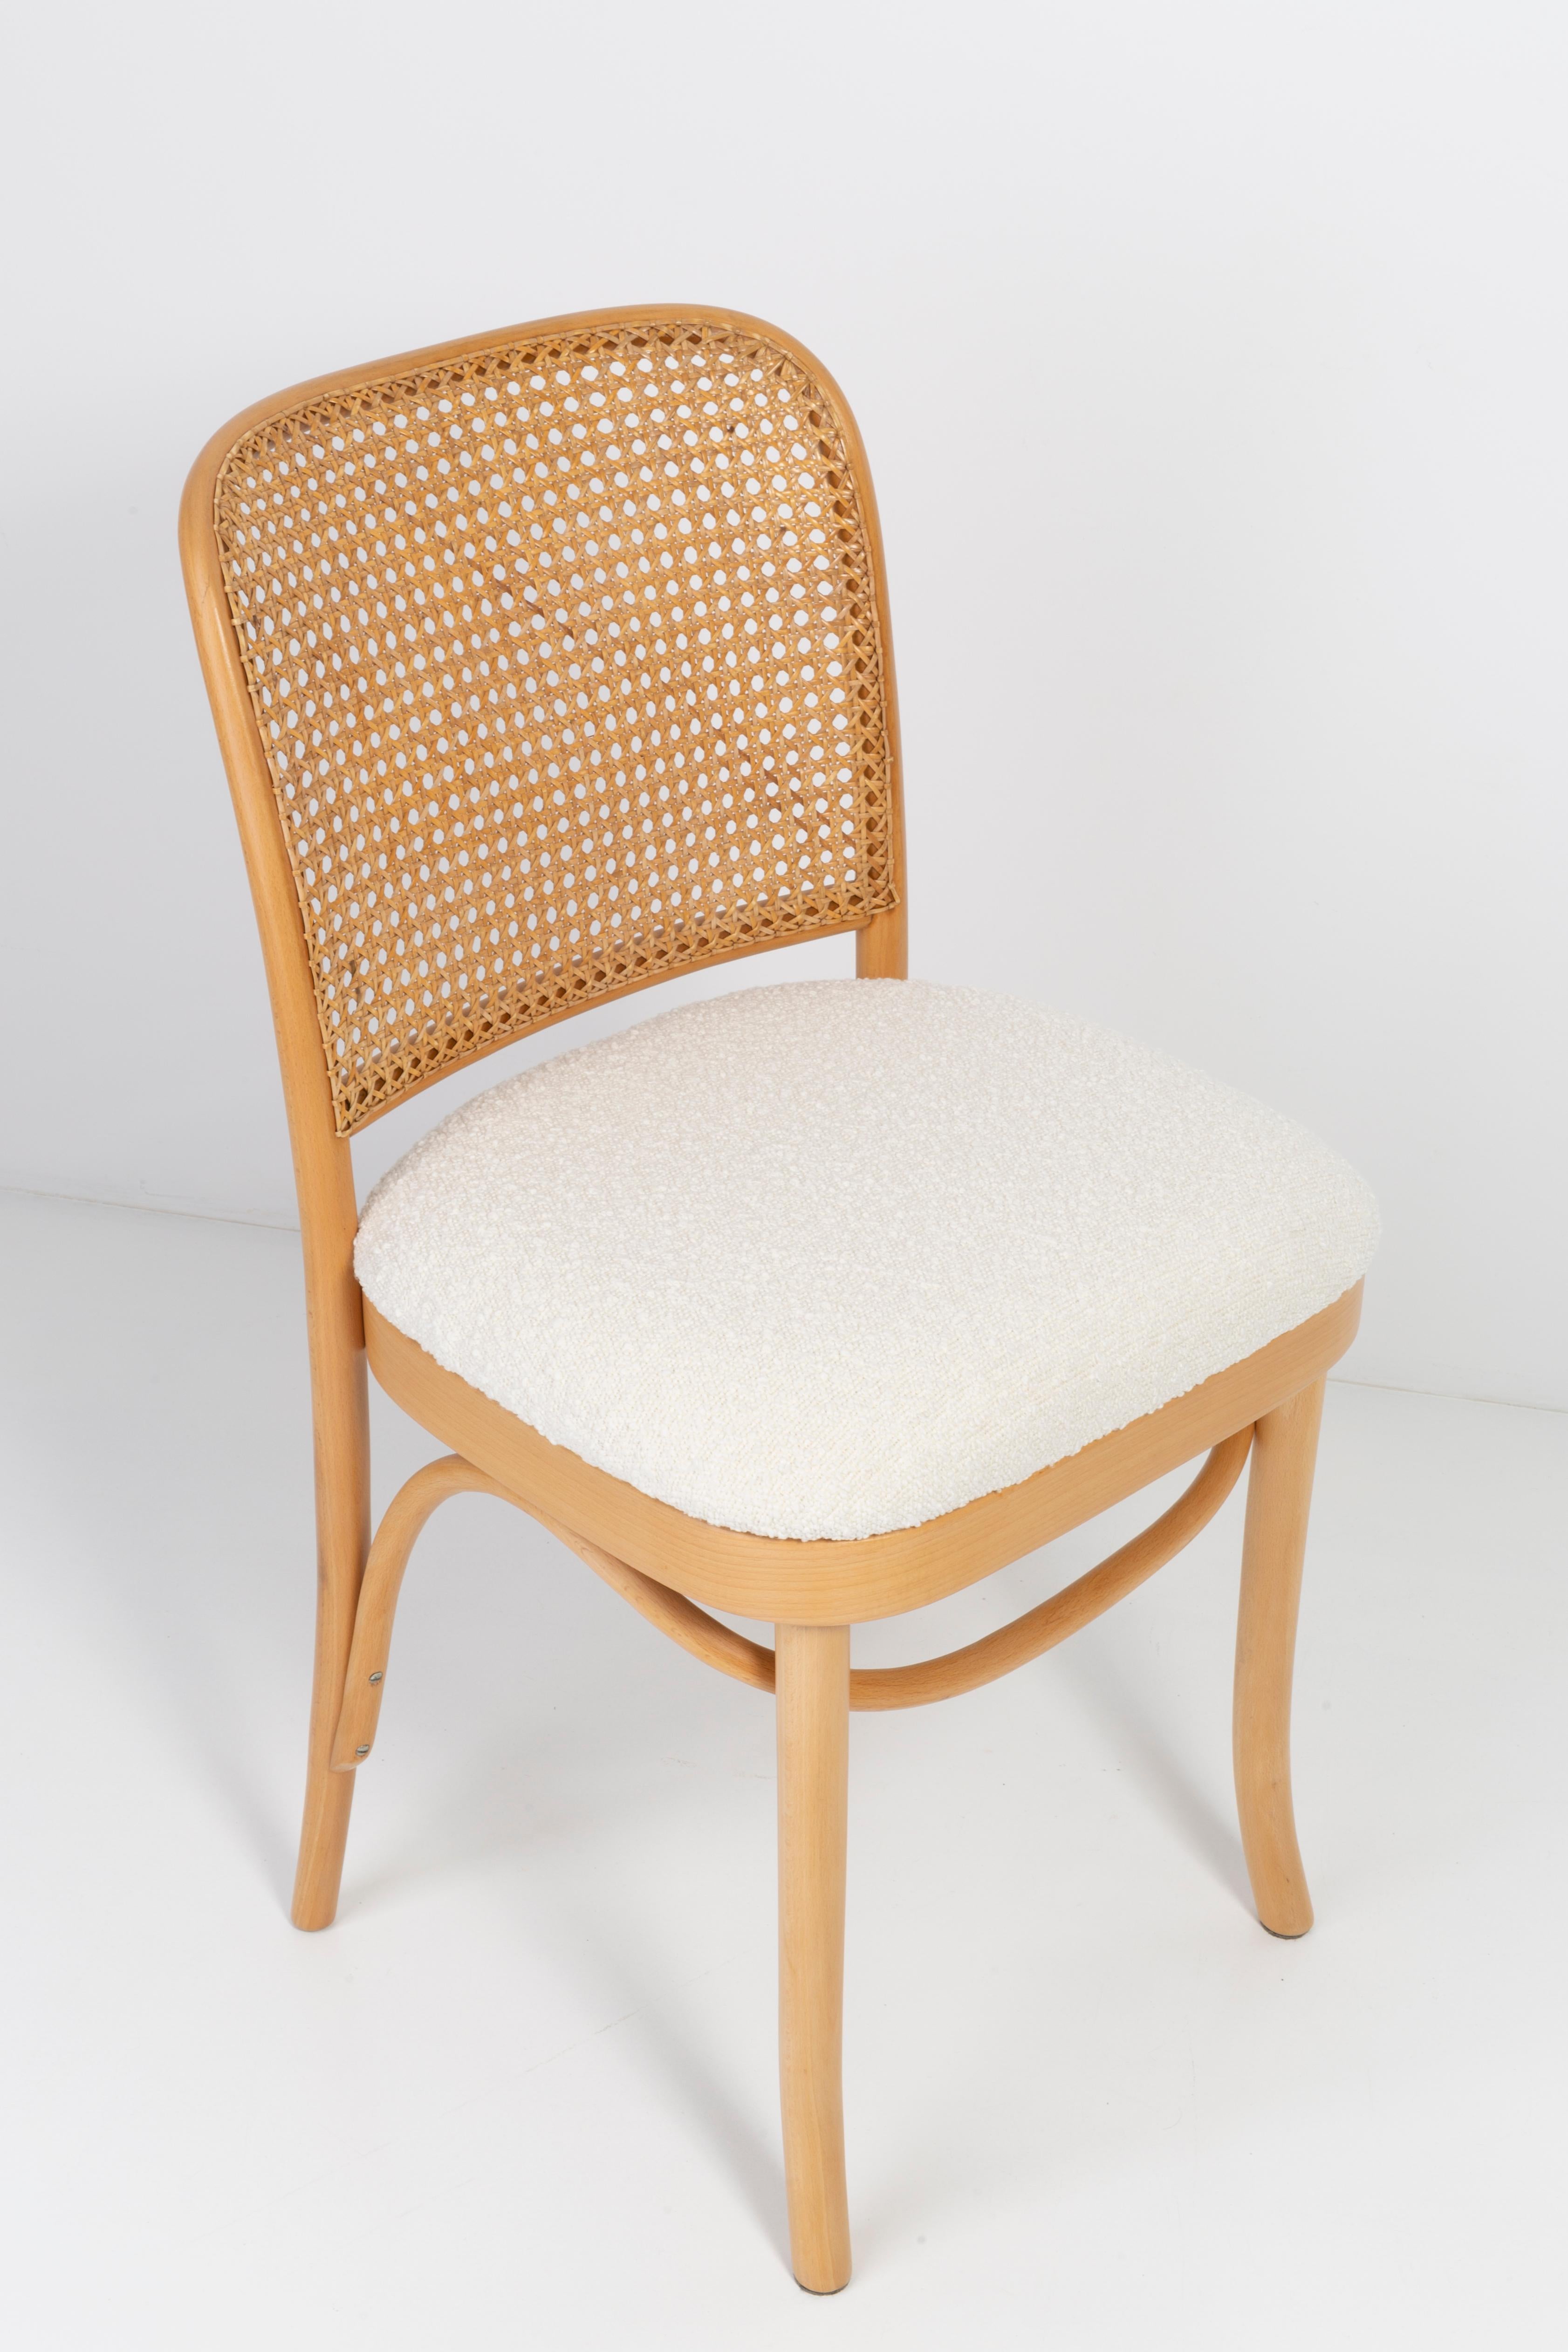 20th Century Set of Eight White Boucle Thonet Wood Rattan Chairs, 1960s For Sale